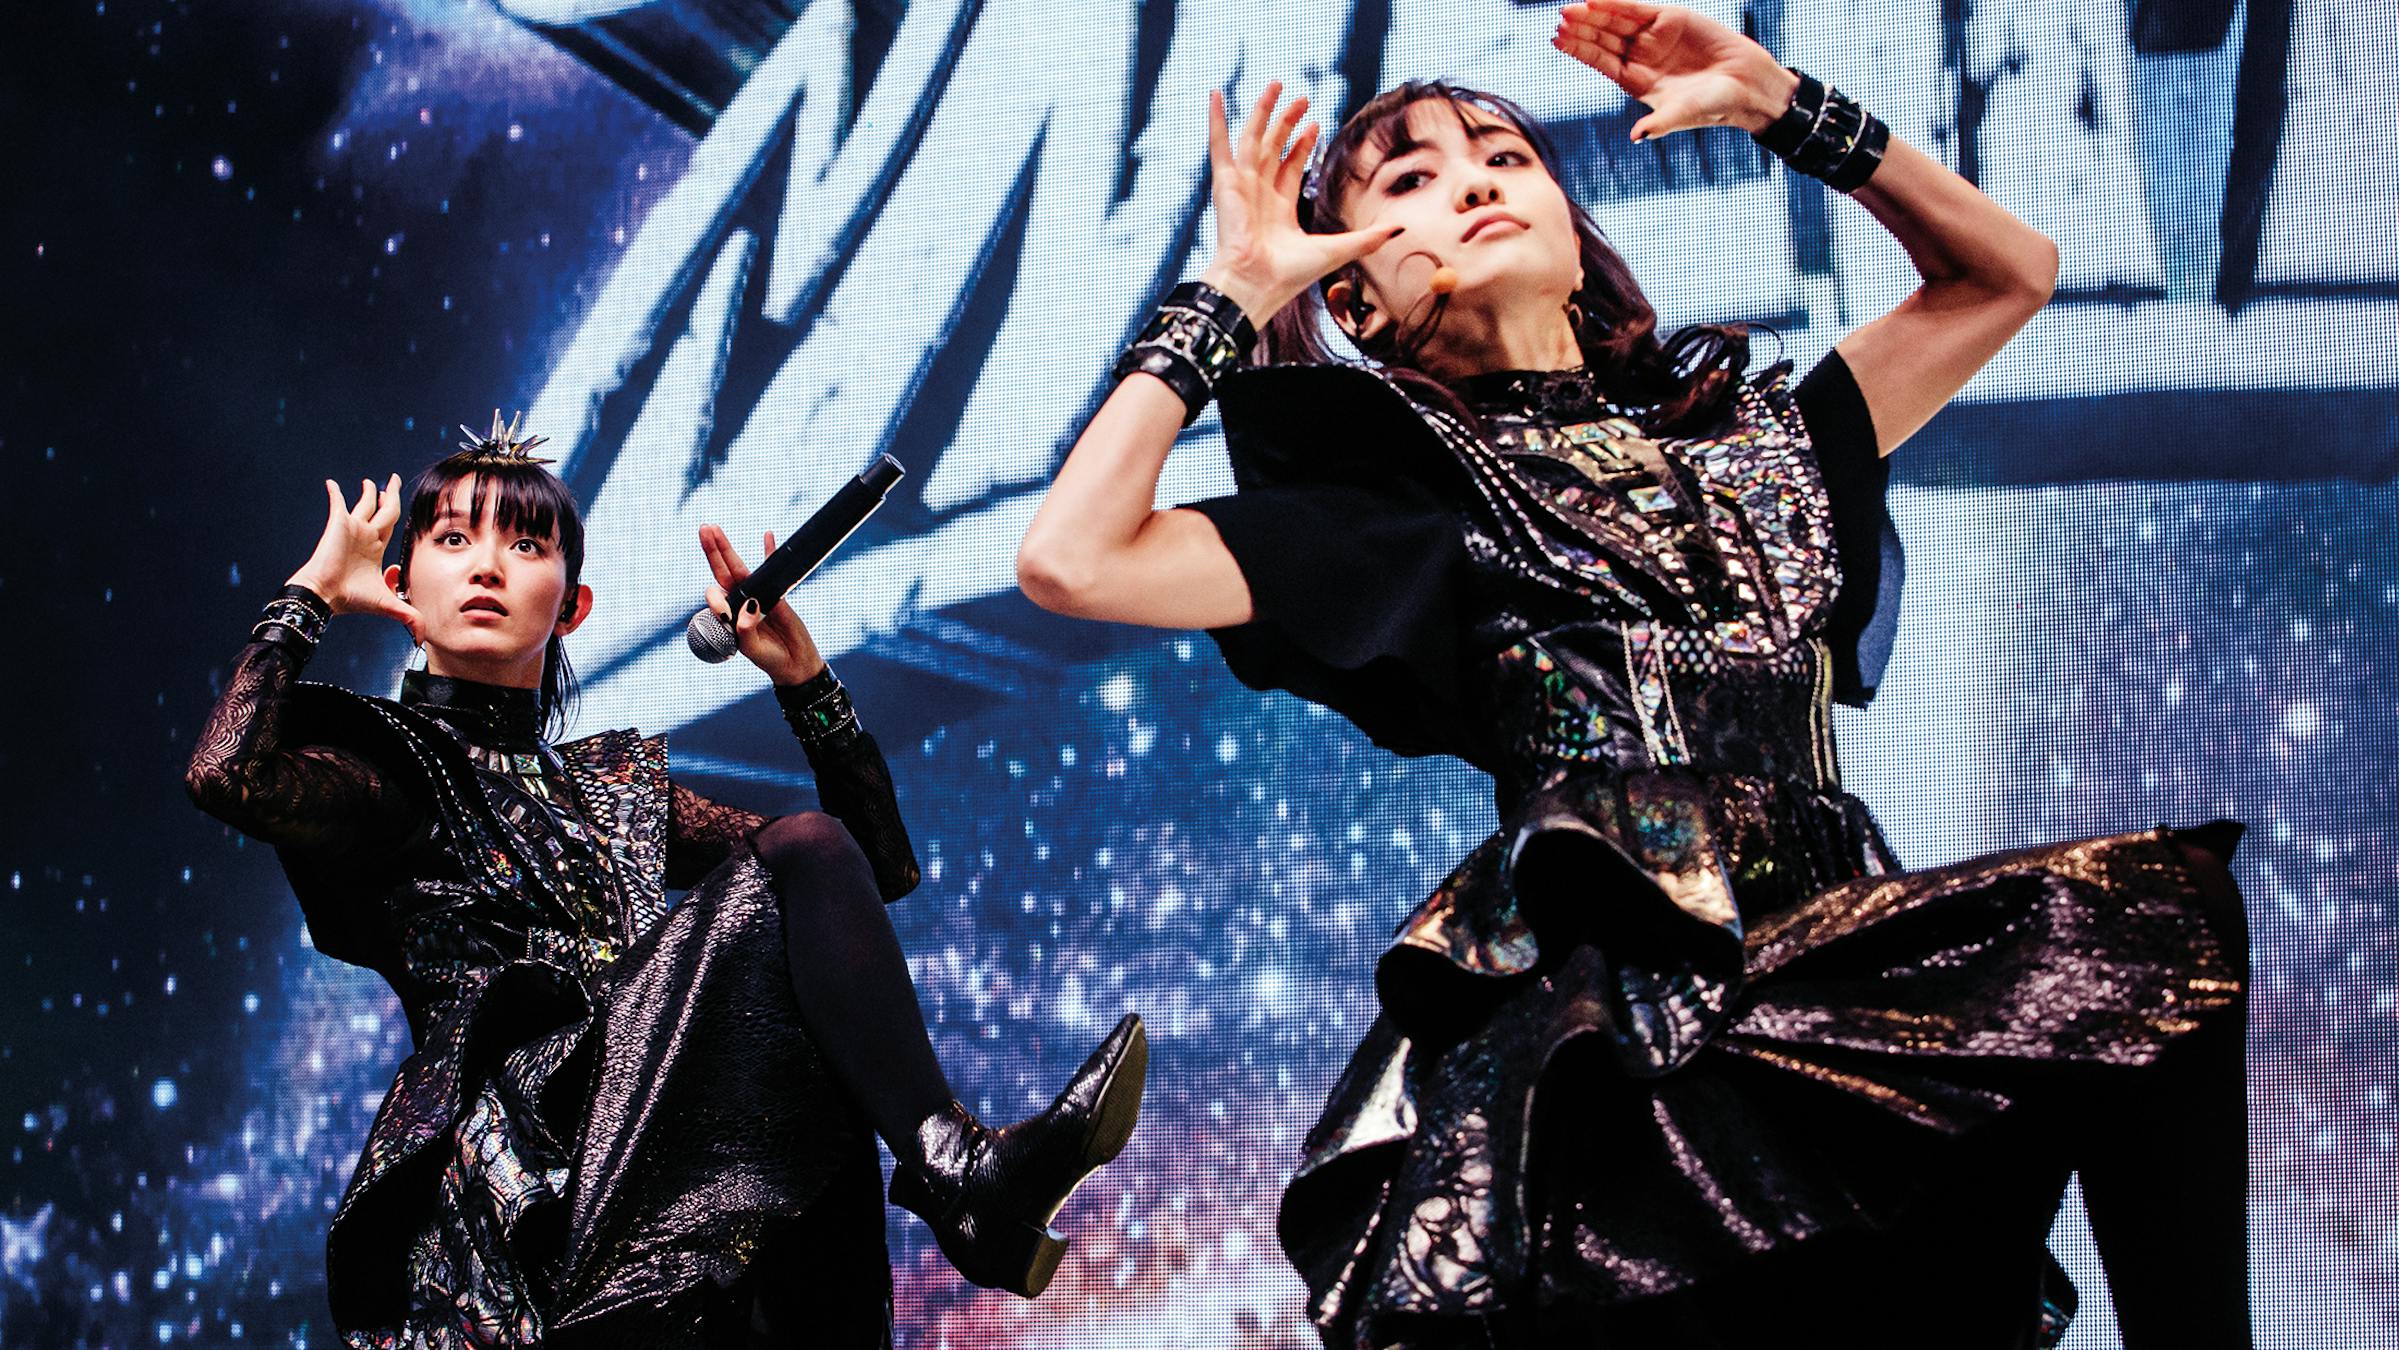 Listen To Bring Me The Horizon's Hectic, Heavy Collab With BABYMETAL